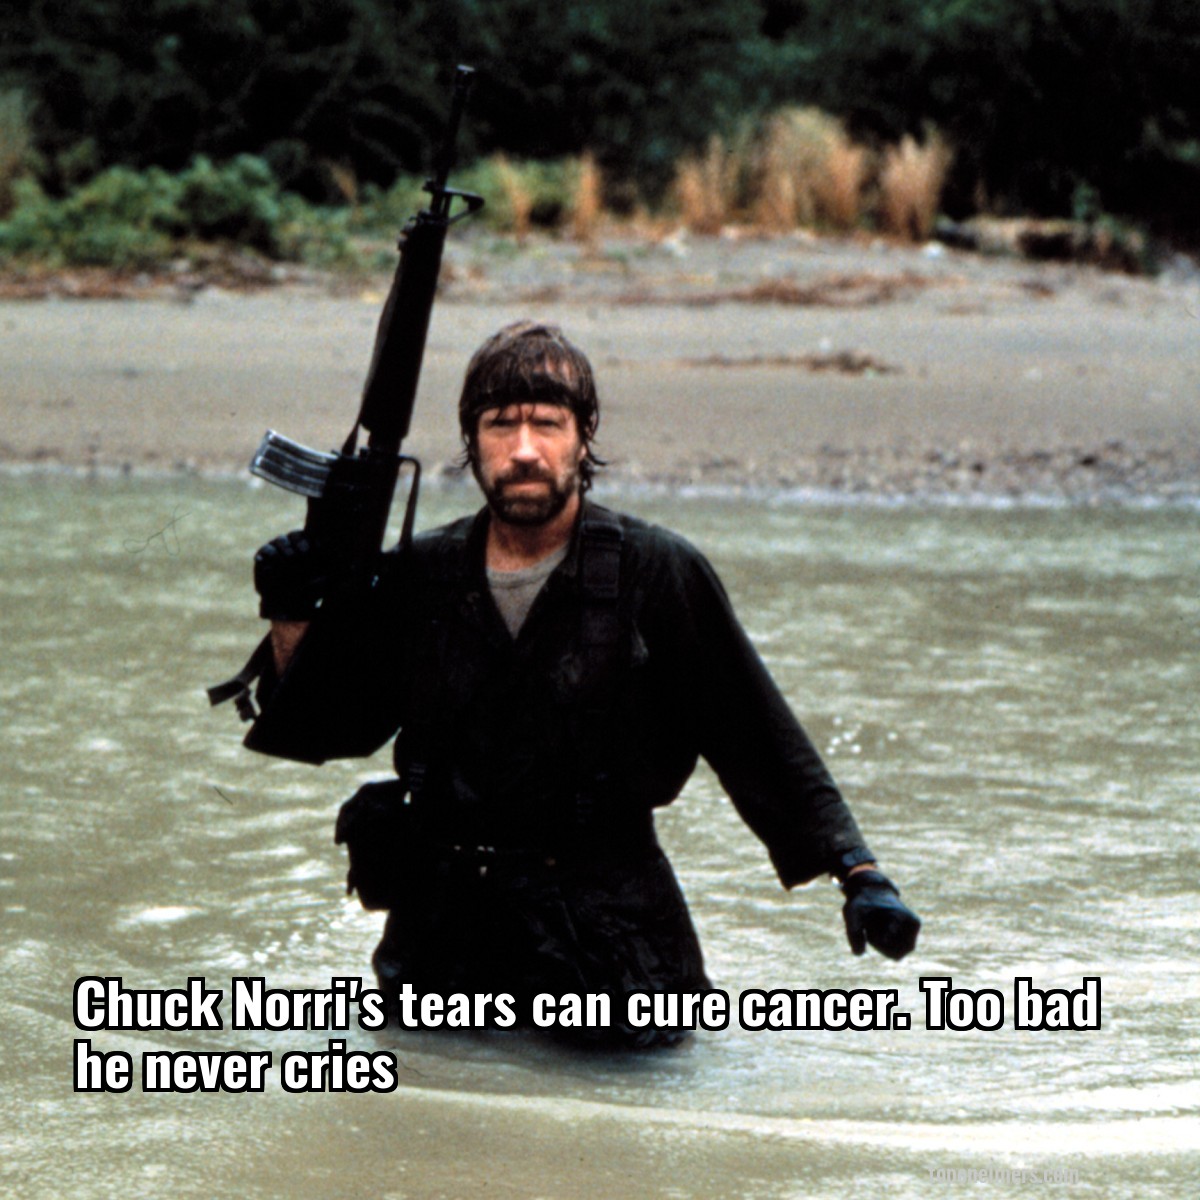 Chuck Norri's tears can cure cancer. Too bad he never cries